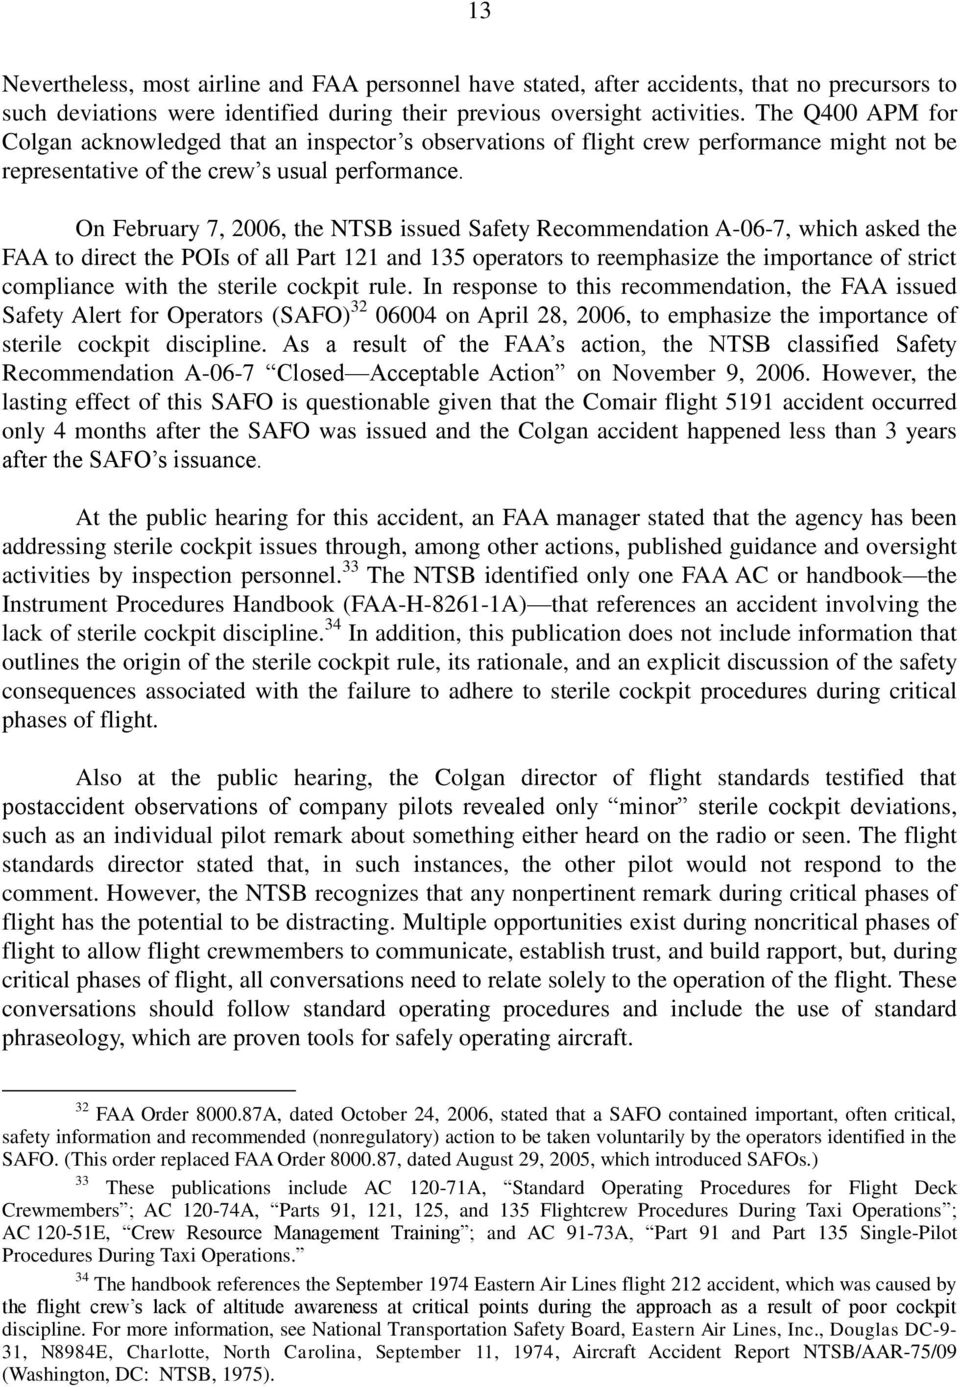 On February 7, 2006, the NTSB issued Safety Recommendation A-06-7, which asked the FAA to direct the POIs of all Part 121 and 135 operators to reemphasize the importance of strict compliance with the